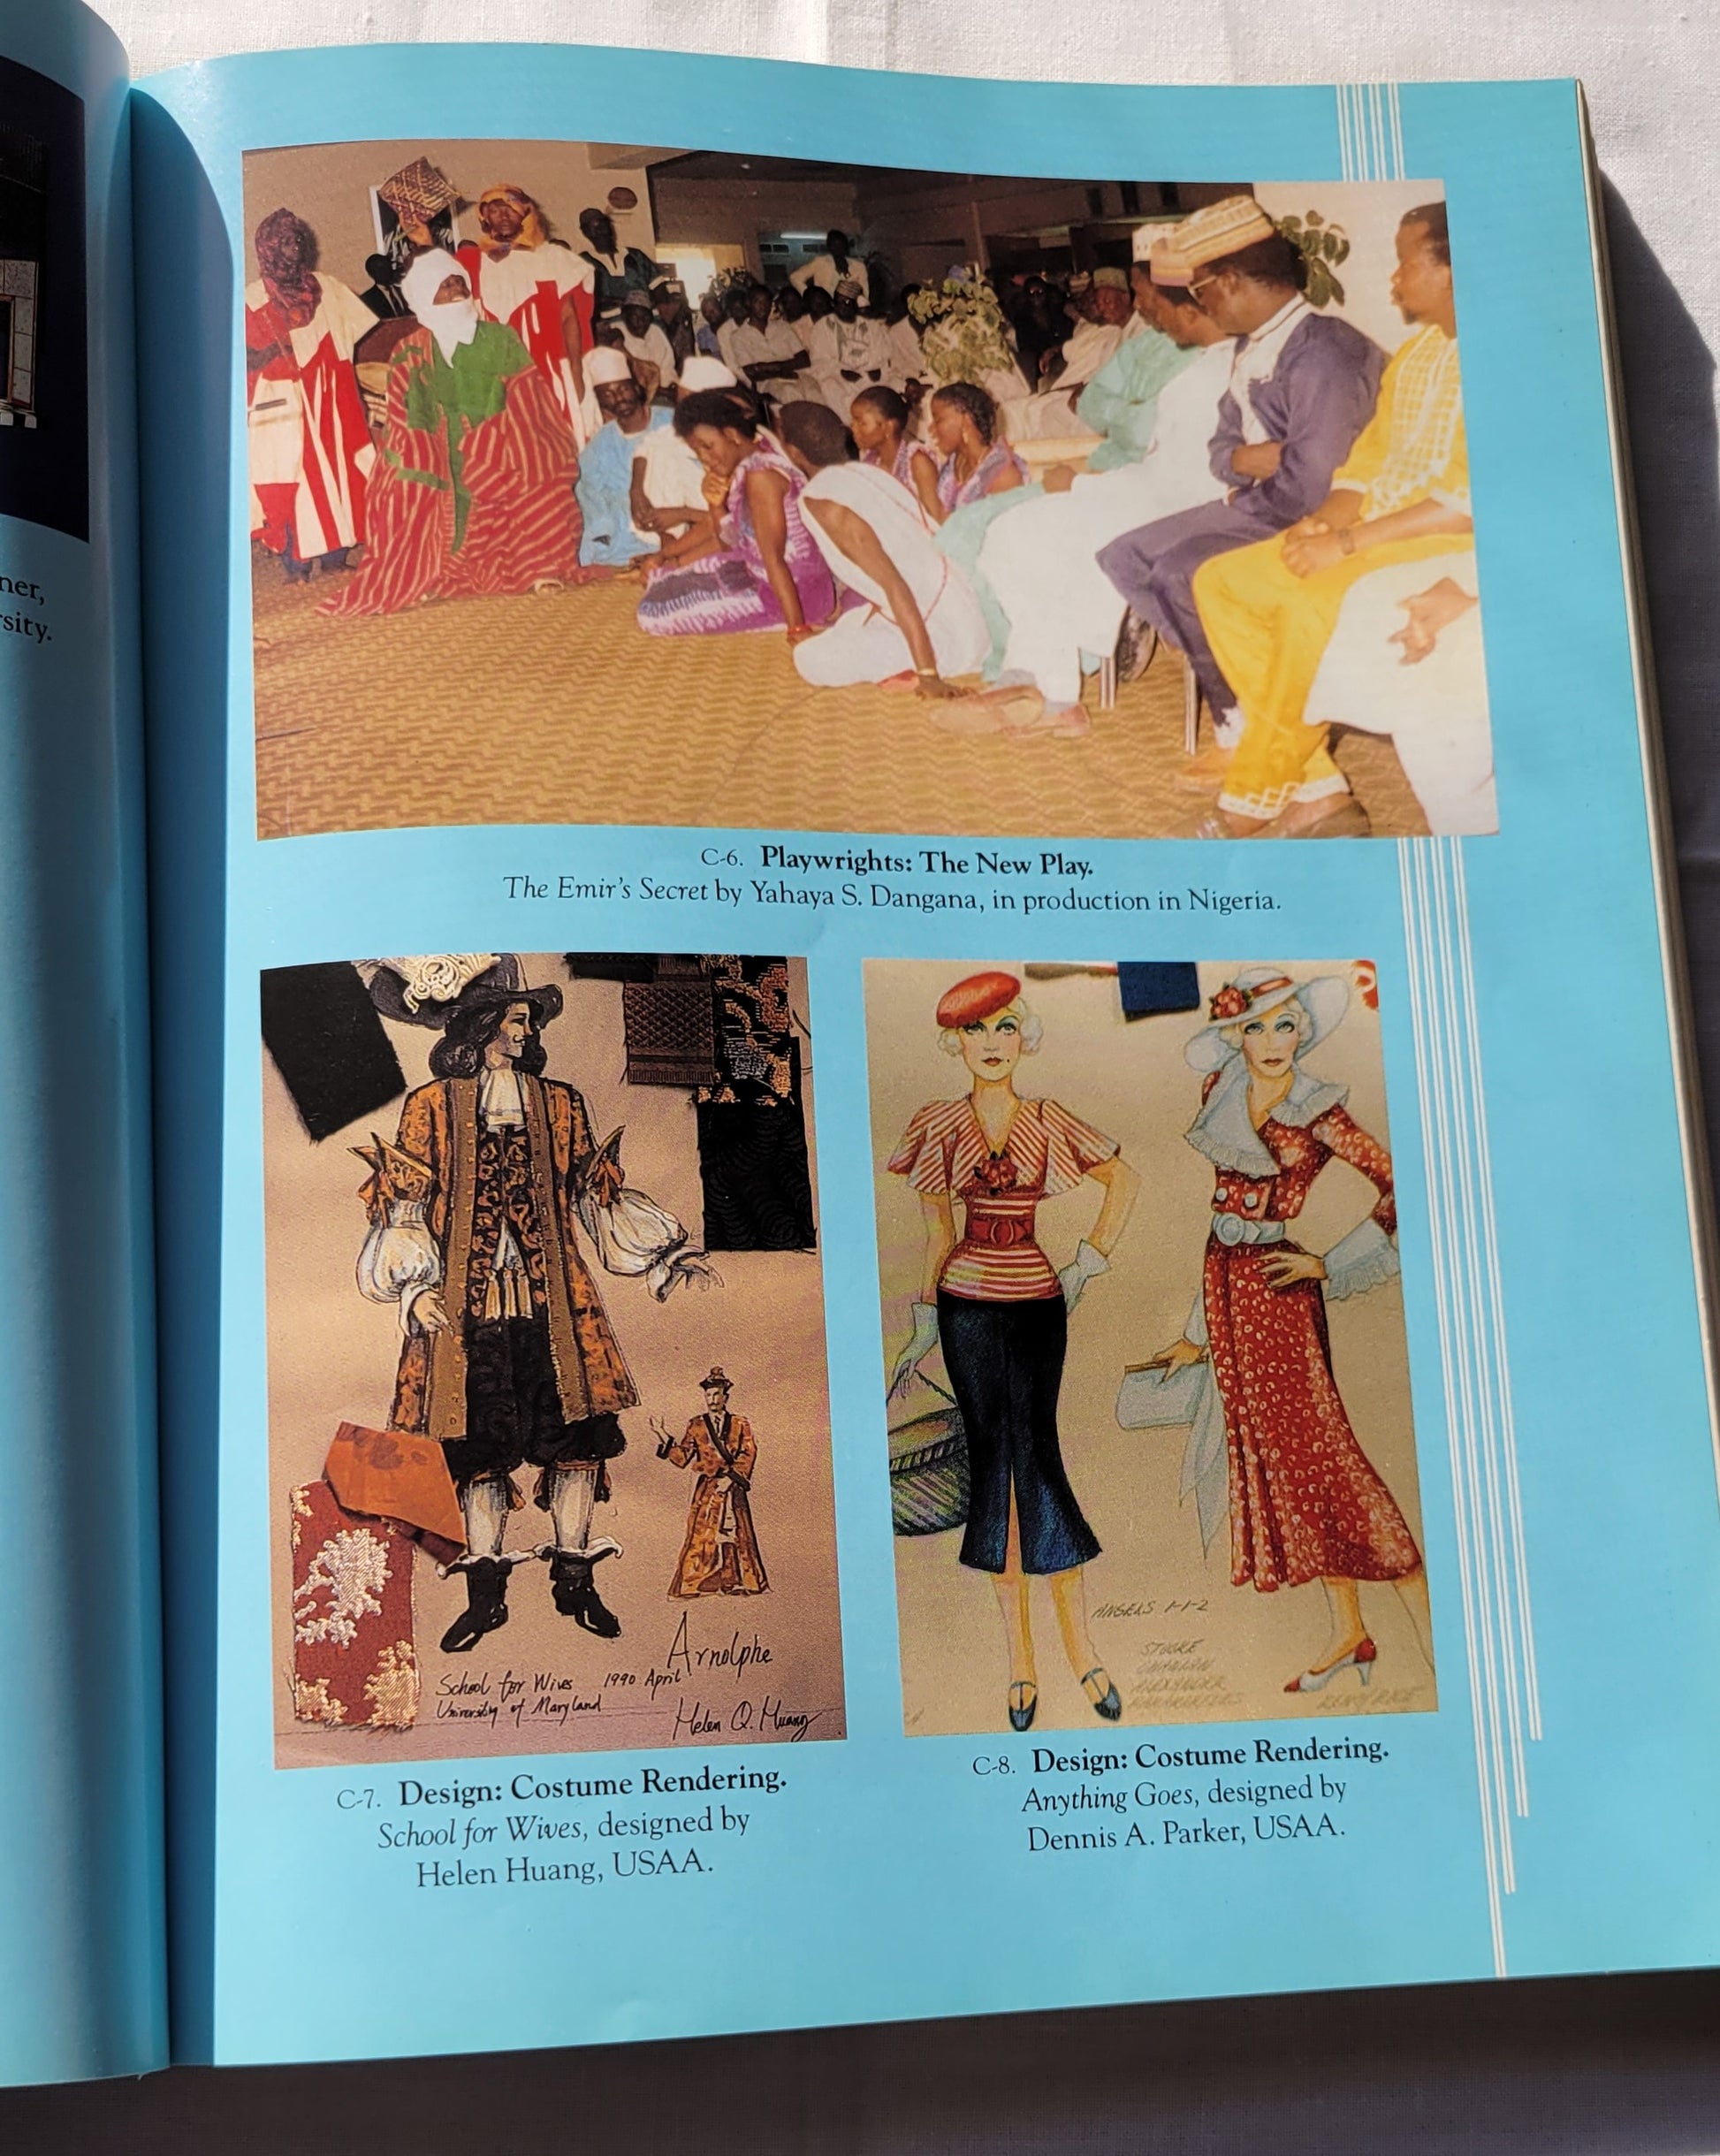 Used book for sale "The Enjoyment of Theatre: Third Edition" by Kenneth M. Cameron and Patti P. Gillespie, published by Maxwell Macmillan International in 1992. Photographs